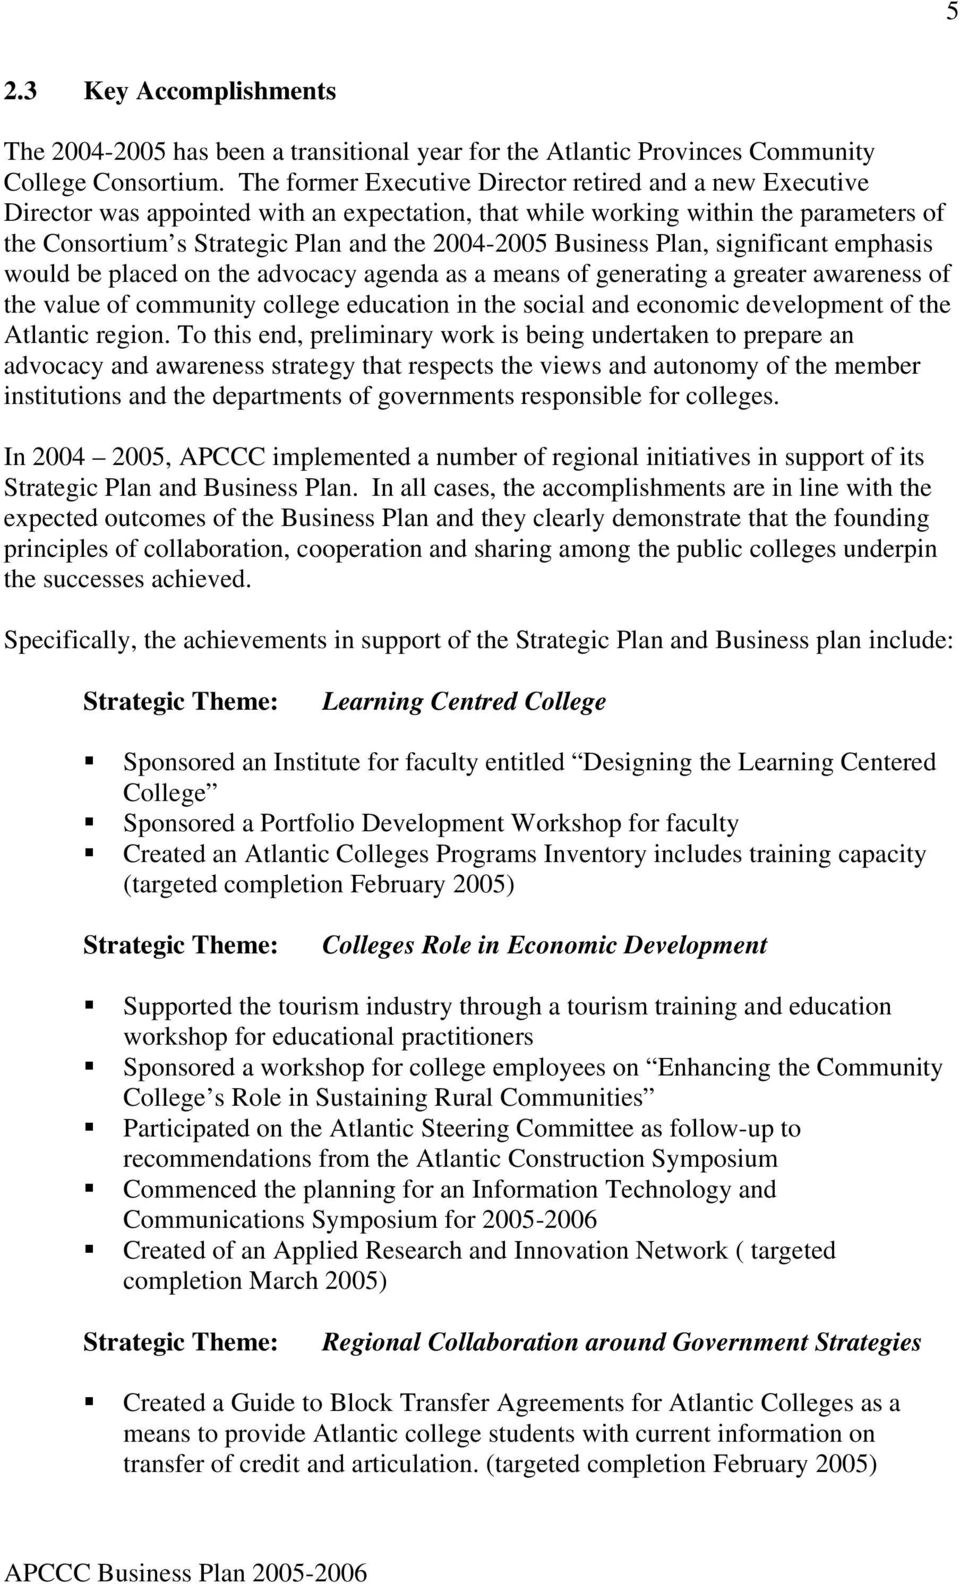 Business Plan, significant emphasis would be placed on the advocacy agenda as a means of generating a greater awareness of the value of community college education in the social and economic